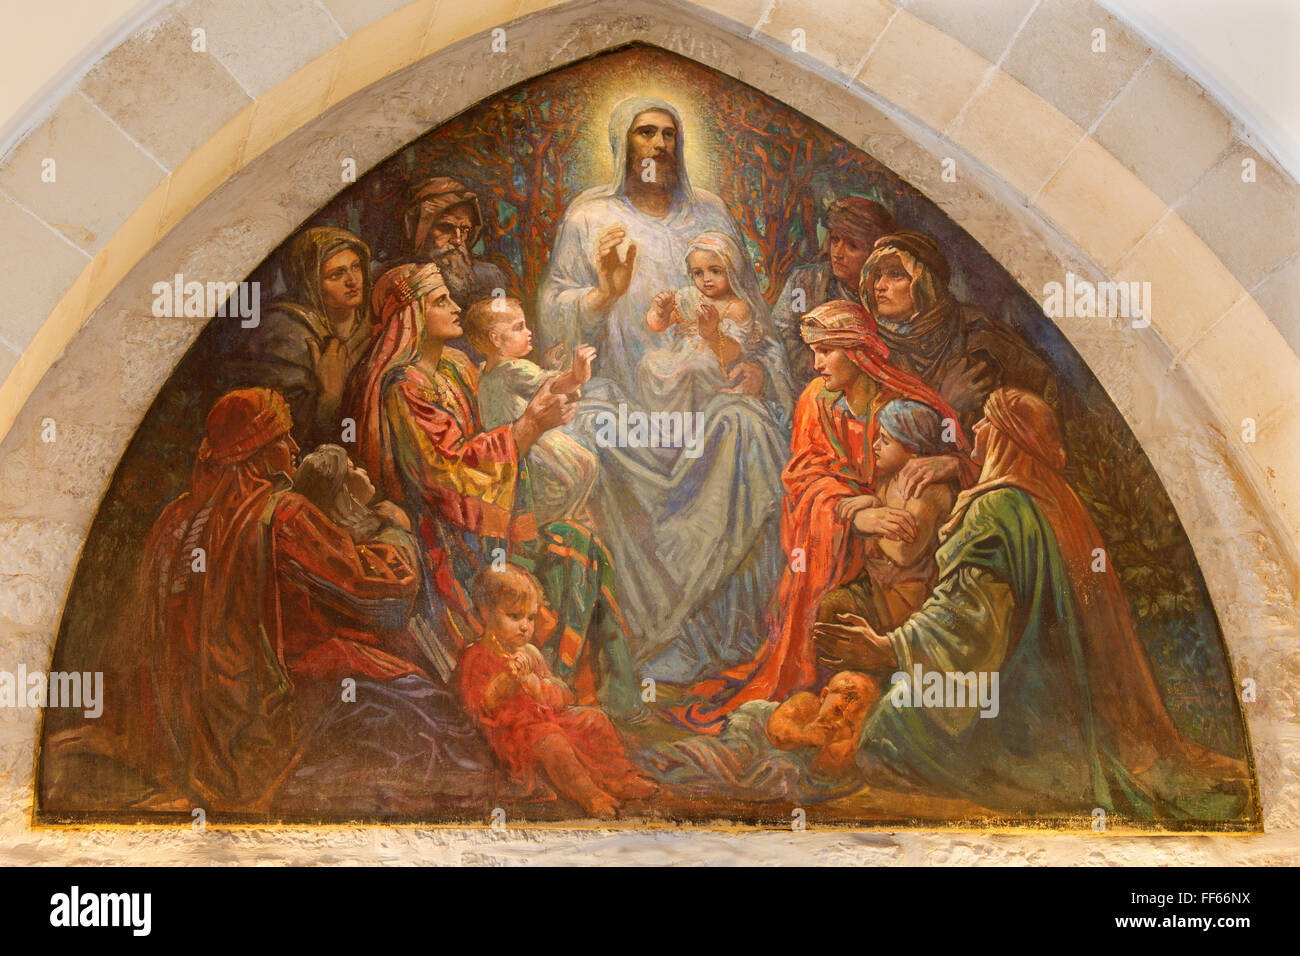 JERUSALEM, ISRAEL - MARCH 5, 2015: The of Jesus among the children in st. George anglicans church from end of 19. cent. Stock Photo